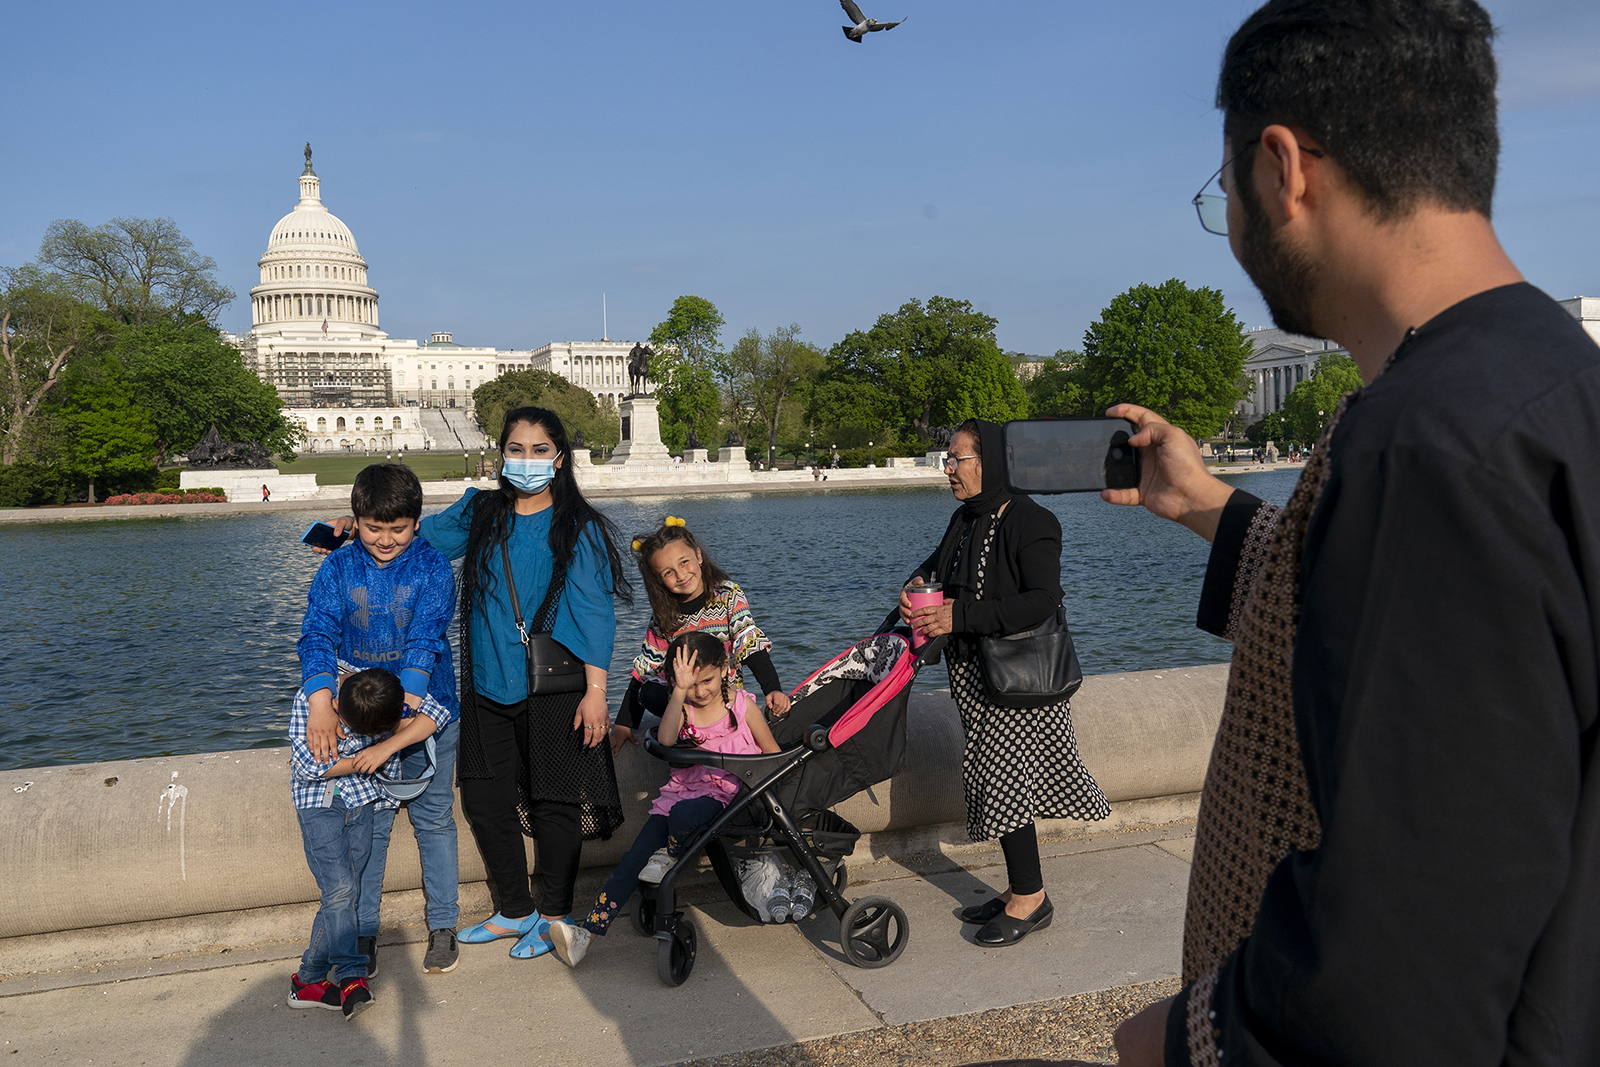 The Safi family celebrates Eid by taking family photographs on the National Mall, May 3, 2022, near the U.S. Capitol in Washington. The family was evacuated from Afghanistan and is trying to make a new life in the U.S., while in immigration limbo. (AP Photo/Jacquelyn Martin)